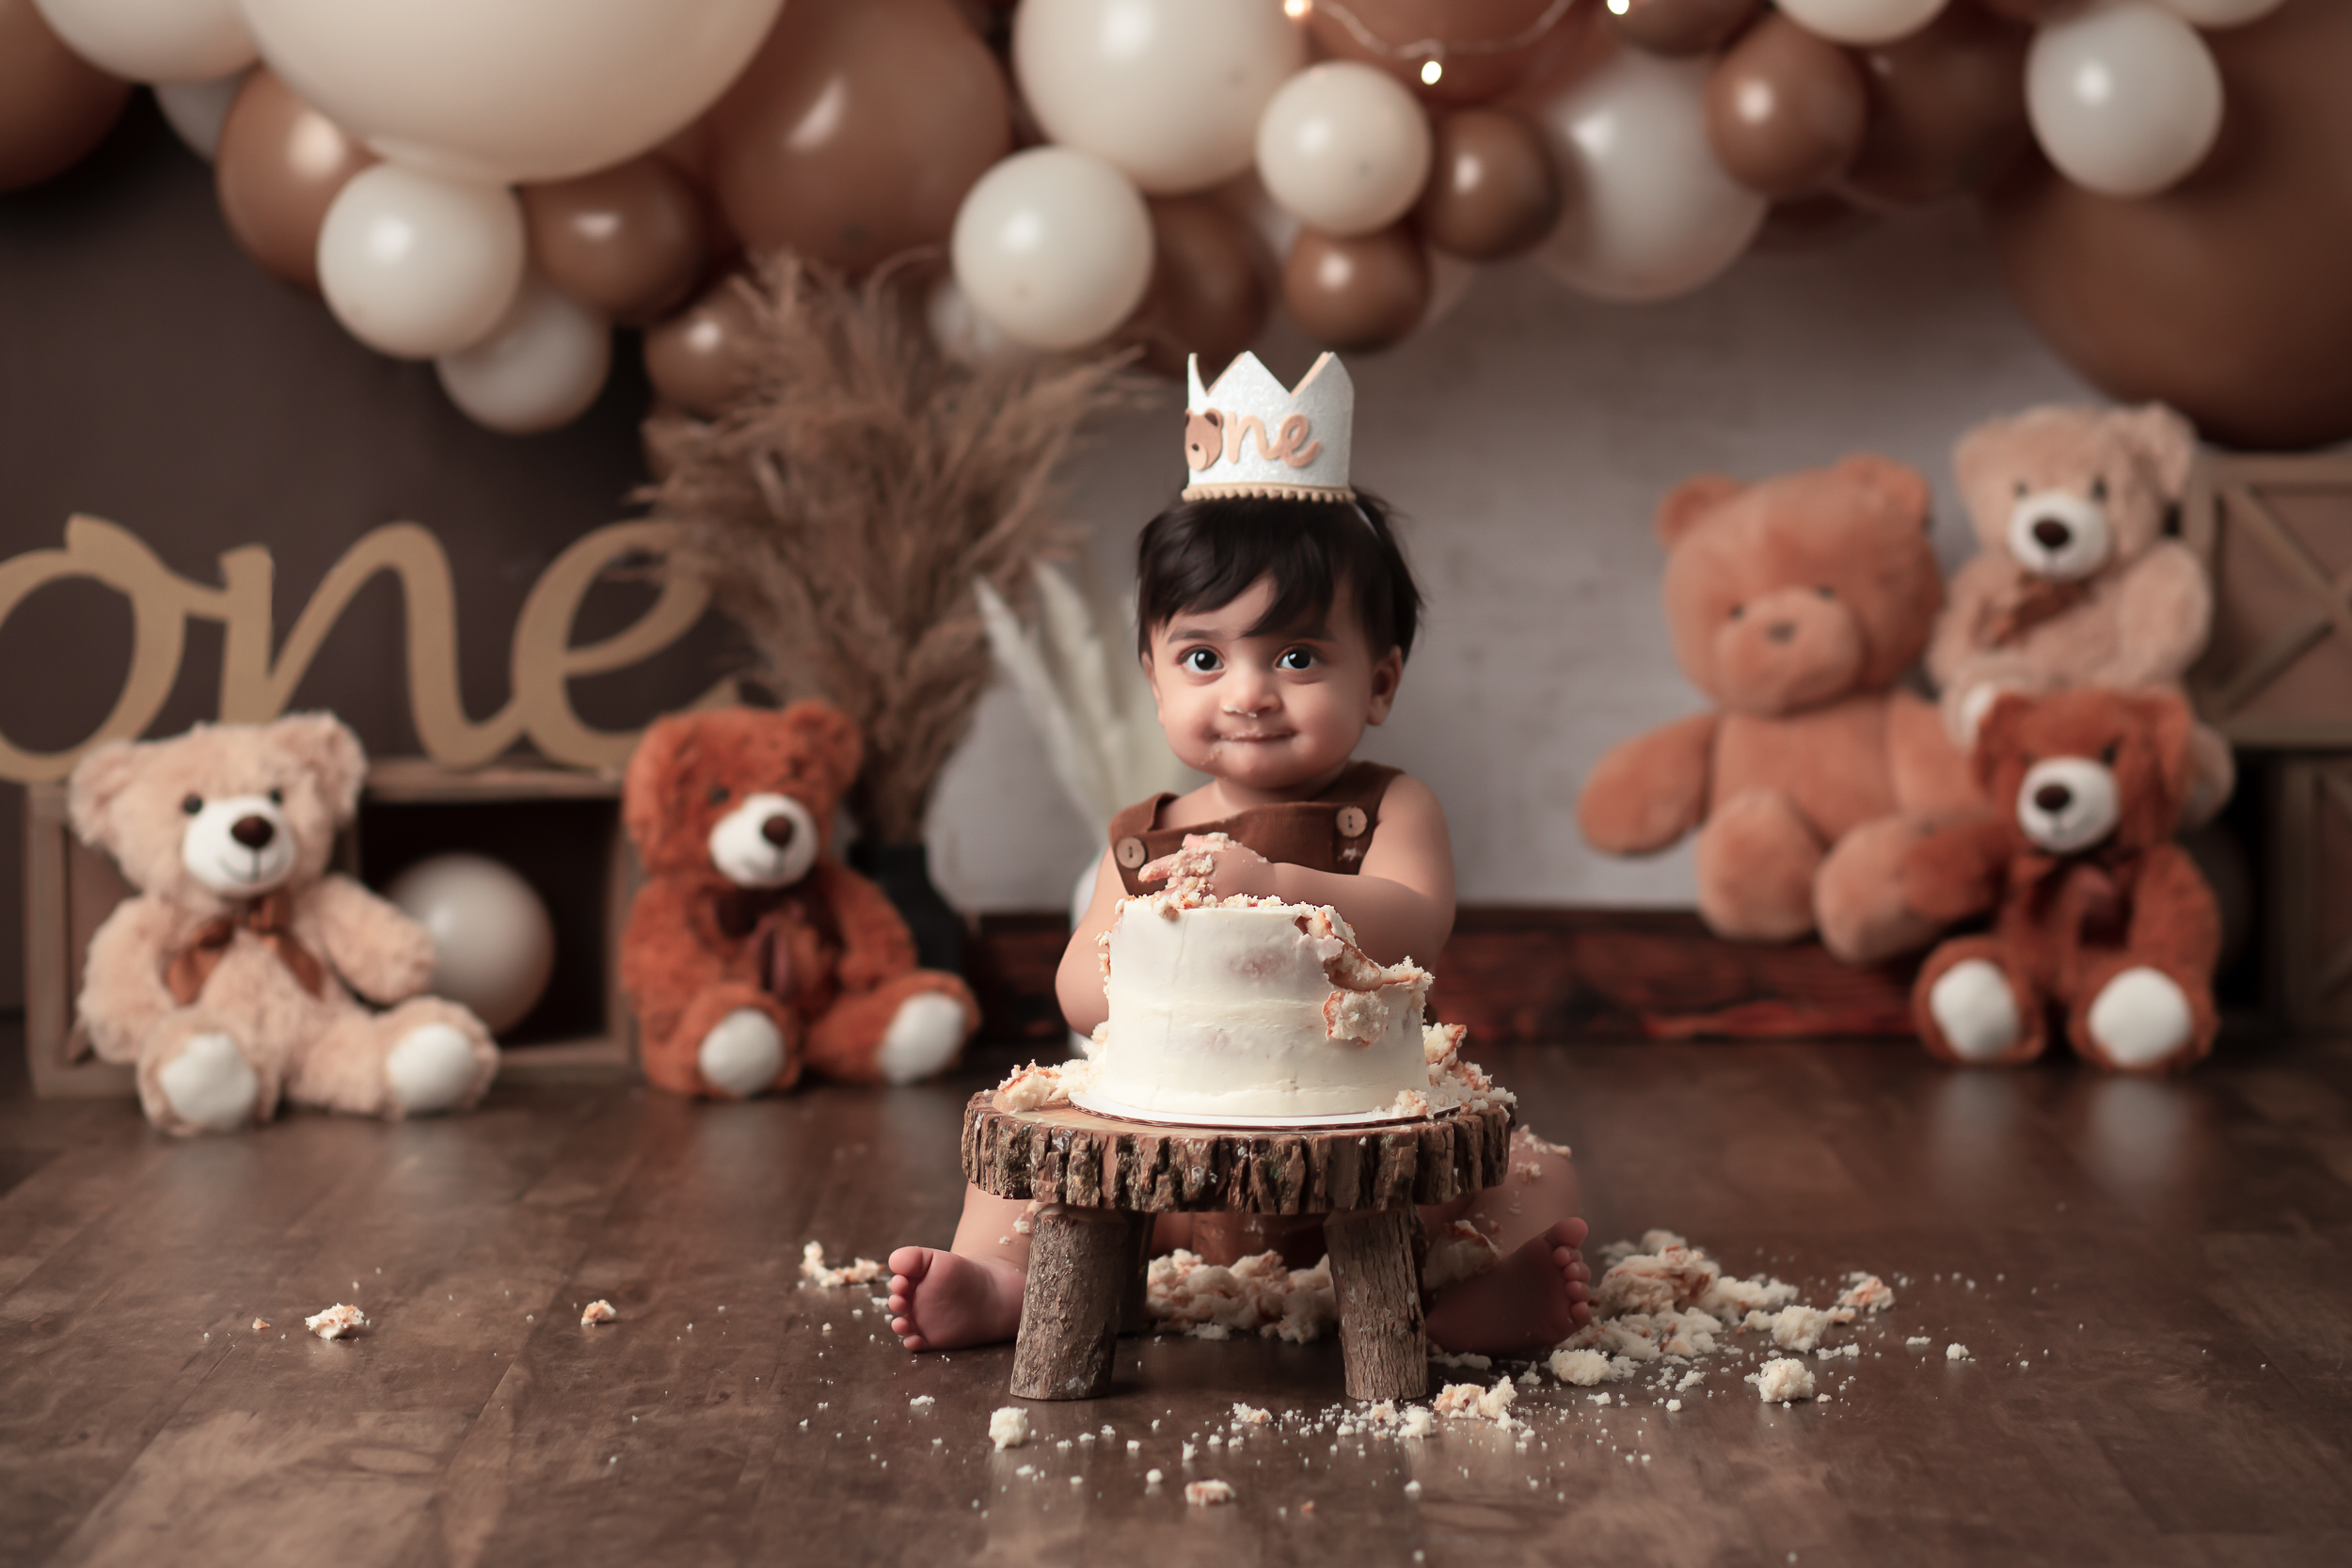 Cake Smash Session of a baby wearing a crown and teddy bears in the backdrop with balloon banner in browns and creams